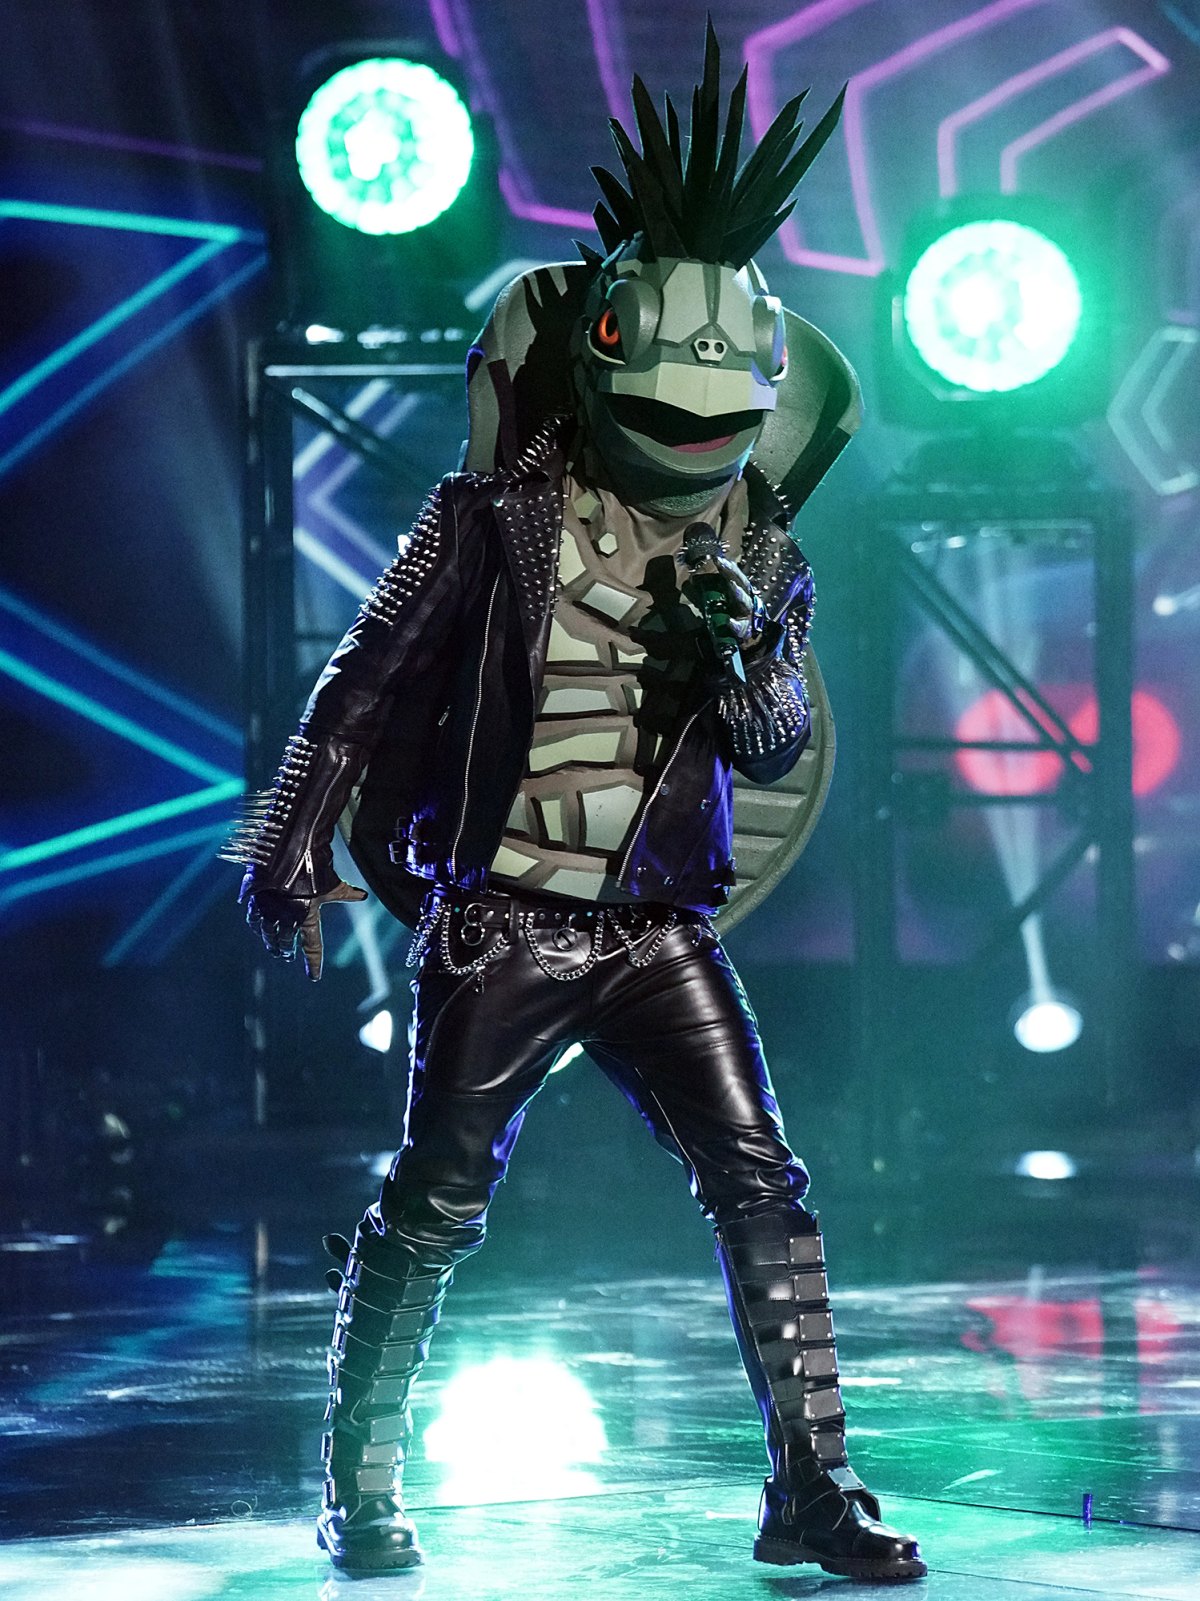 'The Masked Singer' Reveals Miss Monster's Identity